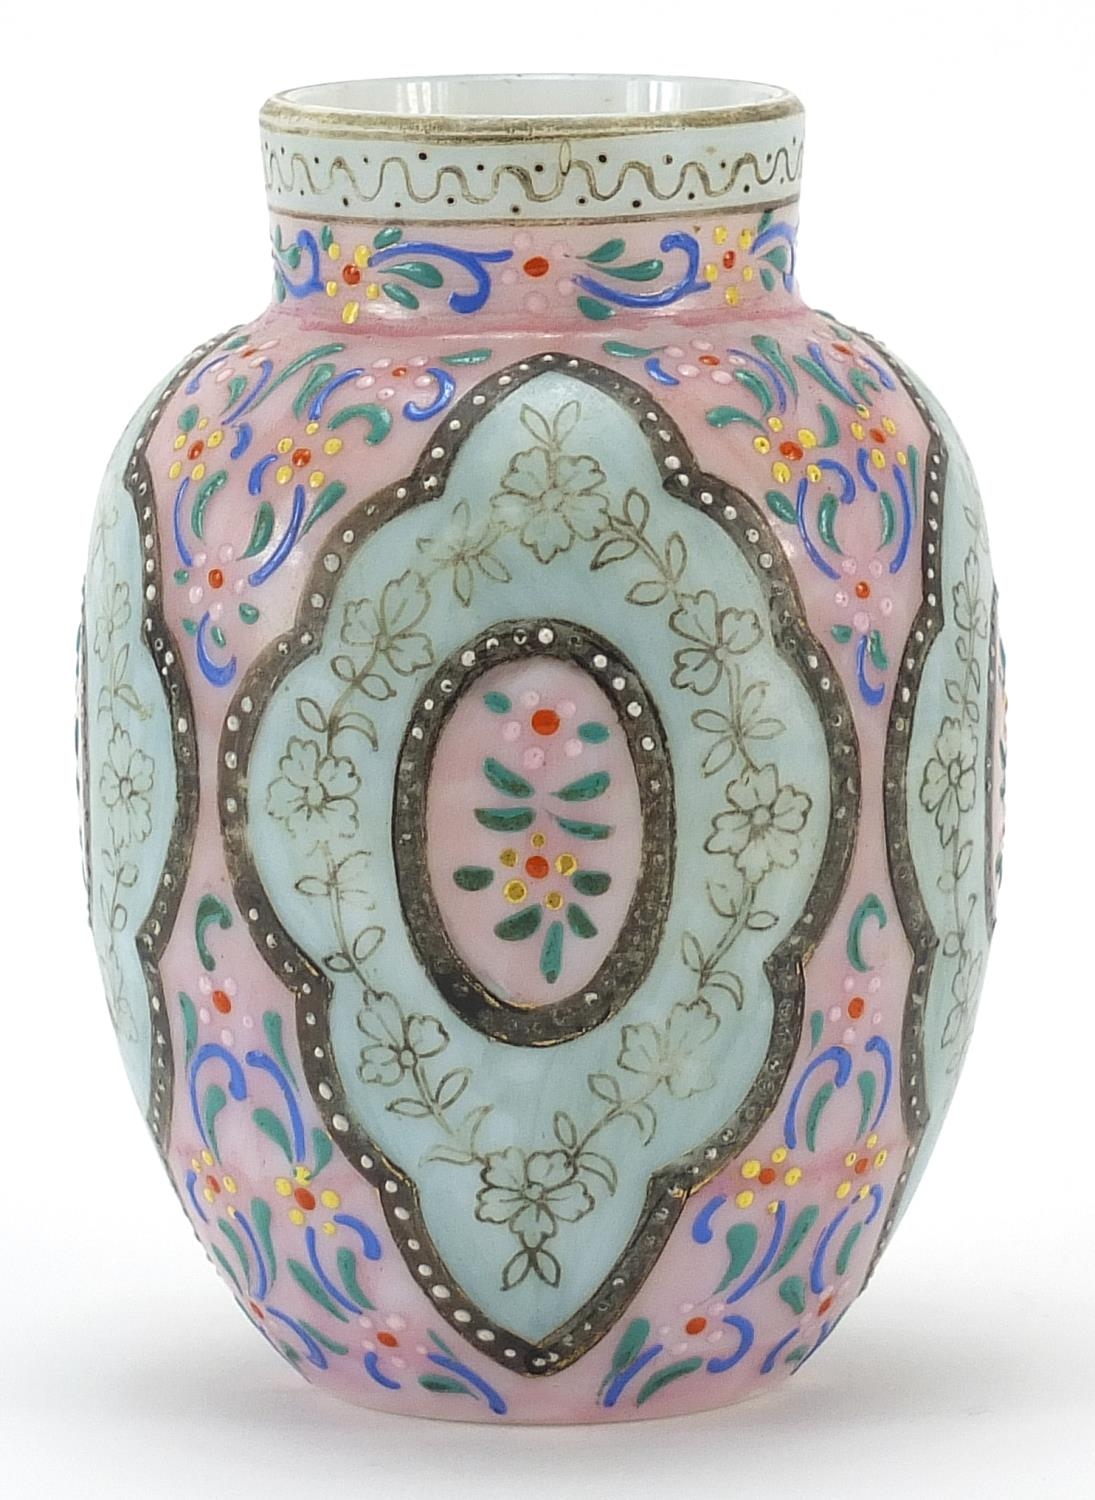 19th century opaque glass vase hand painted in the Islamic manner with flowers, 12.5cm high - Image 2 of 3